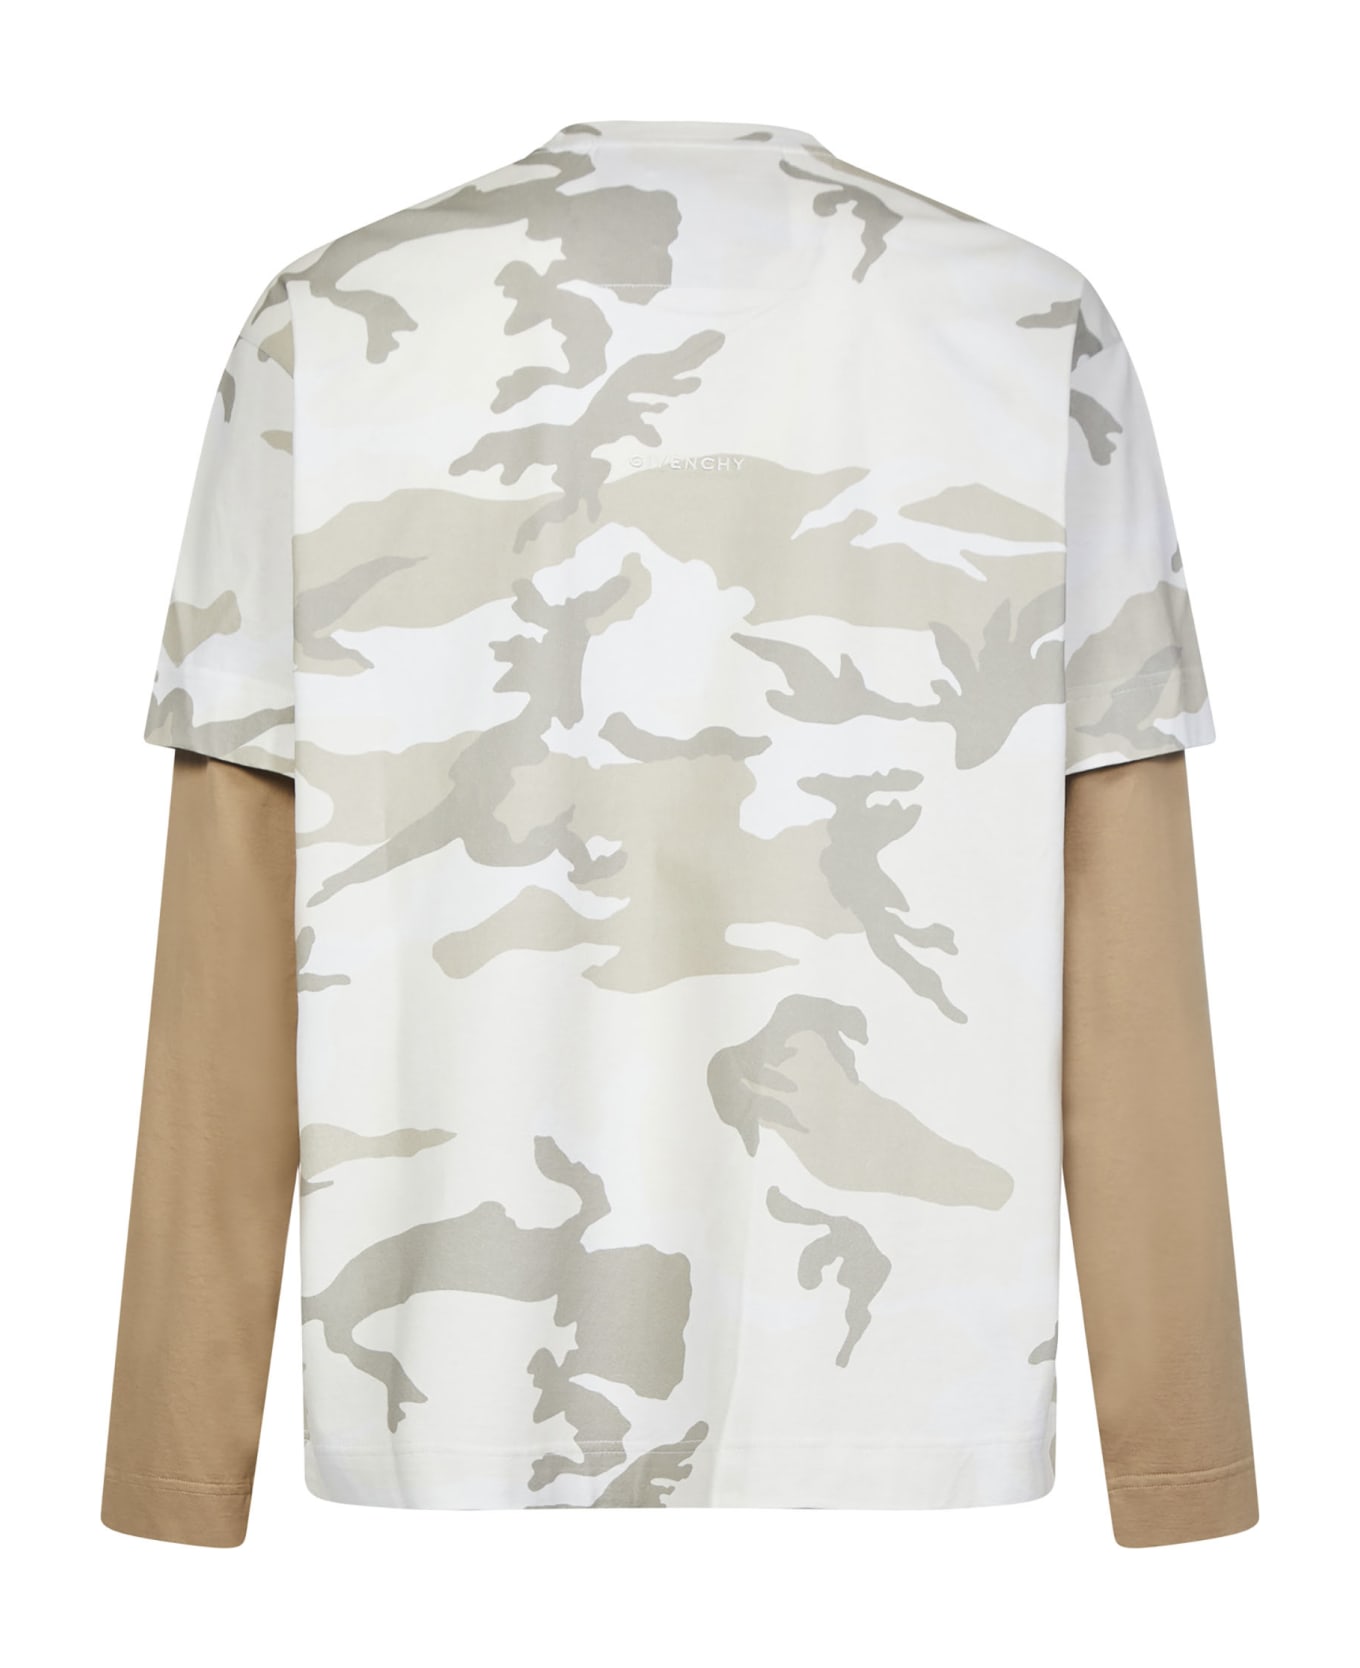 Givenchy T-shirt - Beige